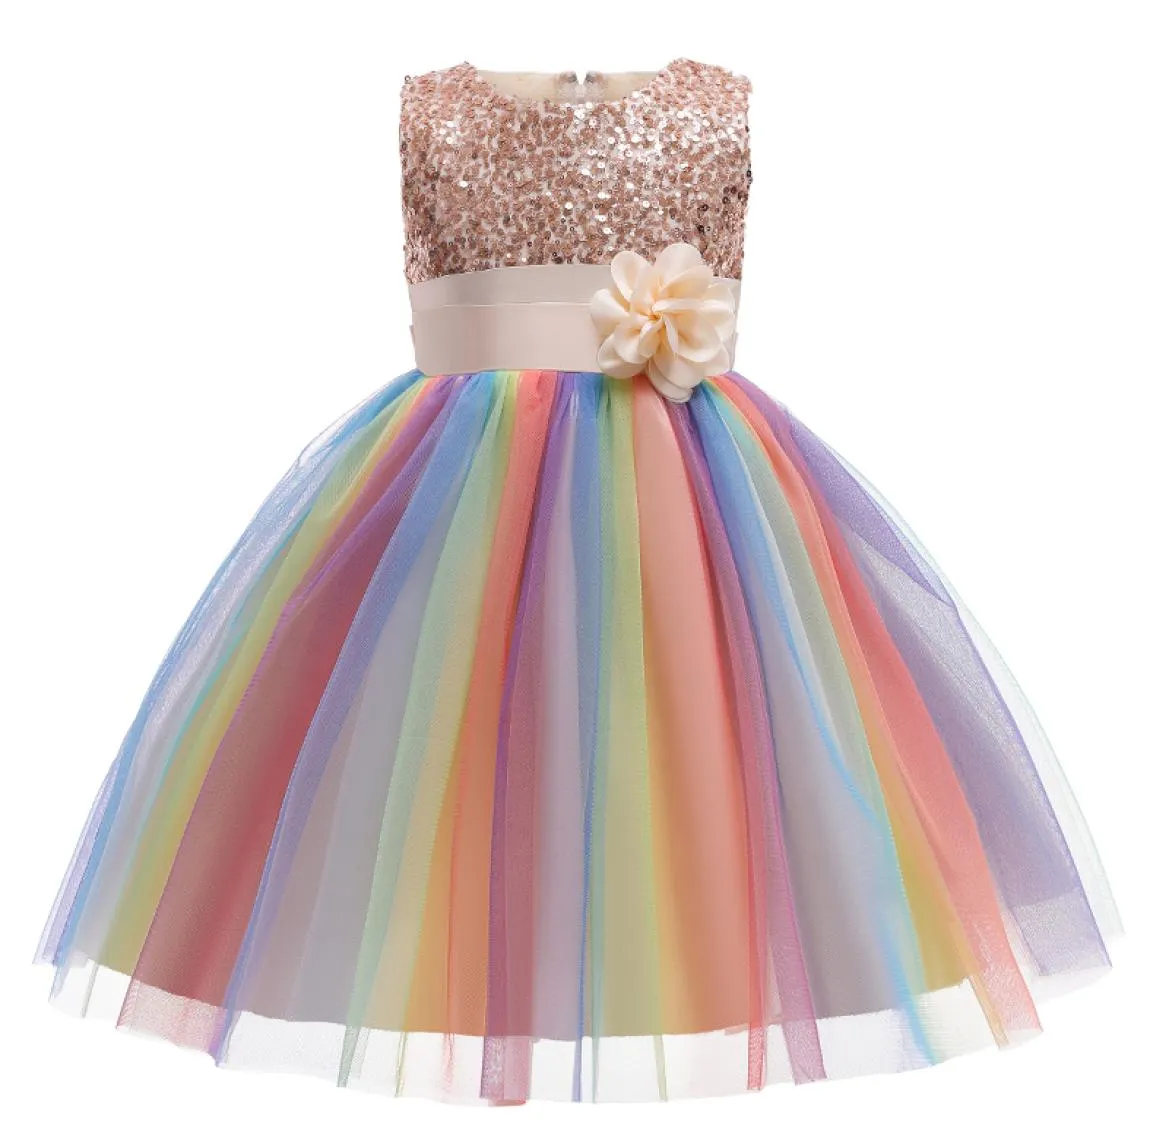 New Girls Dresses For Birthday Baby Girls Sequins Princess party Clothes Girl 310 yrs Christmas Outfits Children Kids clothes8054170